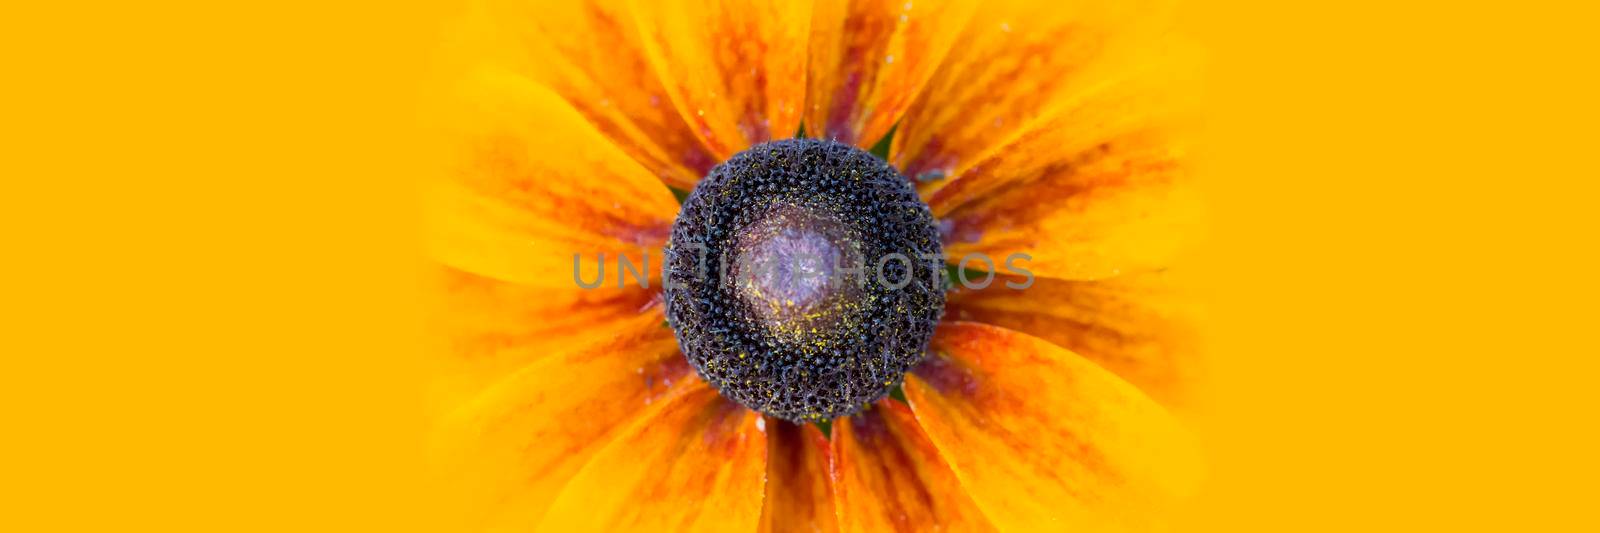 Panorama large yellow flower on a yellow background.Echinacea close up details on yellow banner wide background macro photo. Concept for summer, sun, sunshine, summer holidays travel, tropical flower and hot days. Large text negative panorama space. by Sviatlana